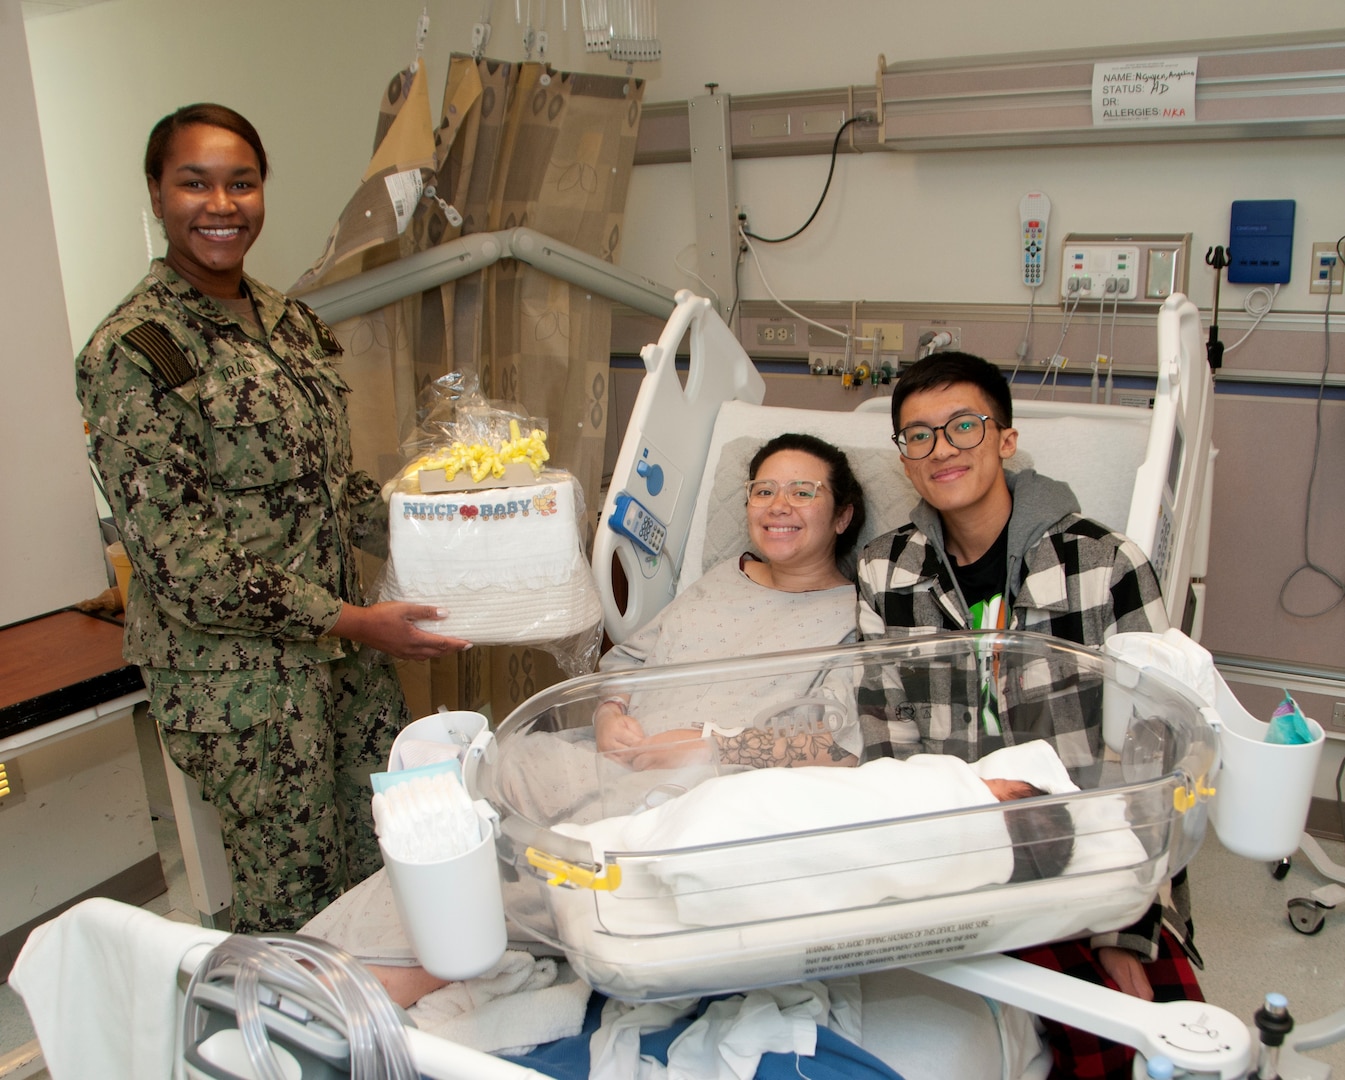 PORTSMOUTH, Va. (Jan. 2) It’s a ‘Happy New Year’ for two Sailors who became parents of the first baby born at Naval Medical Center Portsmouth (NMCP), Jan. 1. IT2 Angelina Nguyen, stationed at Naval Special Warfare Group Four (NSWG4), gave birth to Mahina at 5:08 a.m. on the first day of the new year. Her husband, IT2 Kevin Nguyen, stationed at Beach Master Unit (BMU) 2, was at his wife’s side when she received the First Baby Born 2024 basket provided each year by The Oakleaf Club of Tidewater. Lt. j.g. Mikala Tracy, the patient’s nurse, presented the basket filled with various baby items to the new parents on behalf of the club.